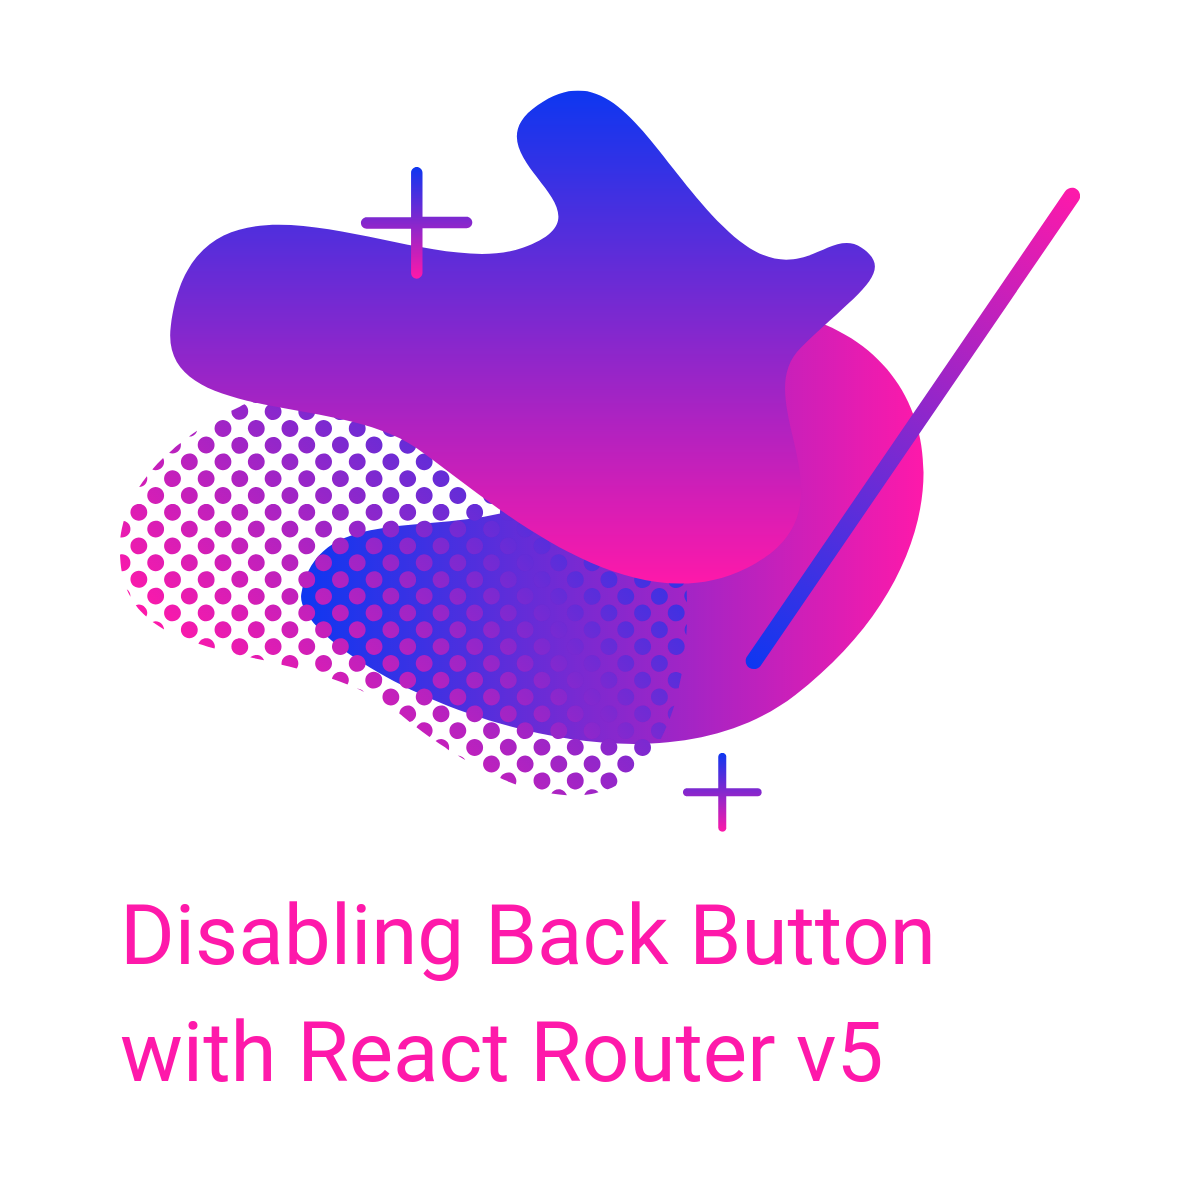 Disabling back button in React with react-router v5